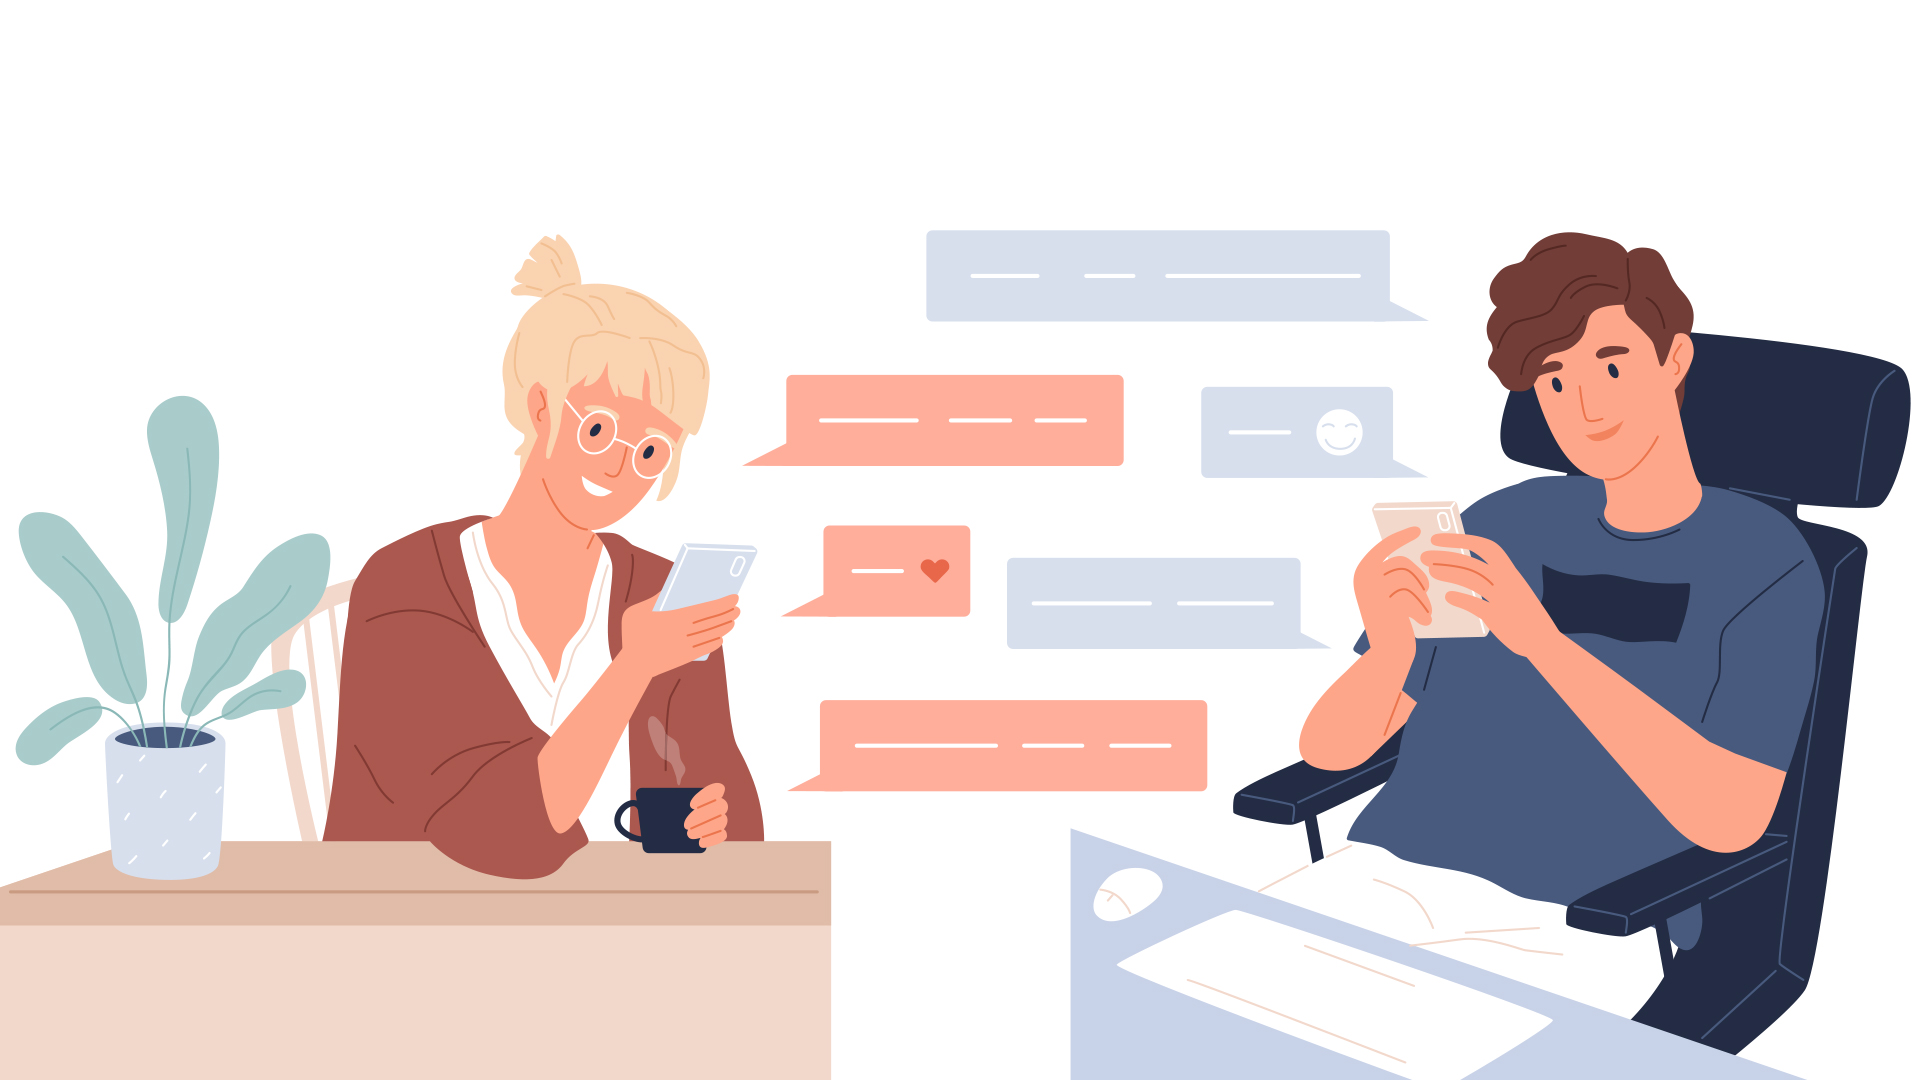 Cartoon drawing of a blonde woman and brunette man sitting down and chatting with each other through their phones.